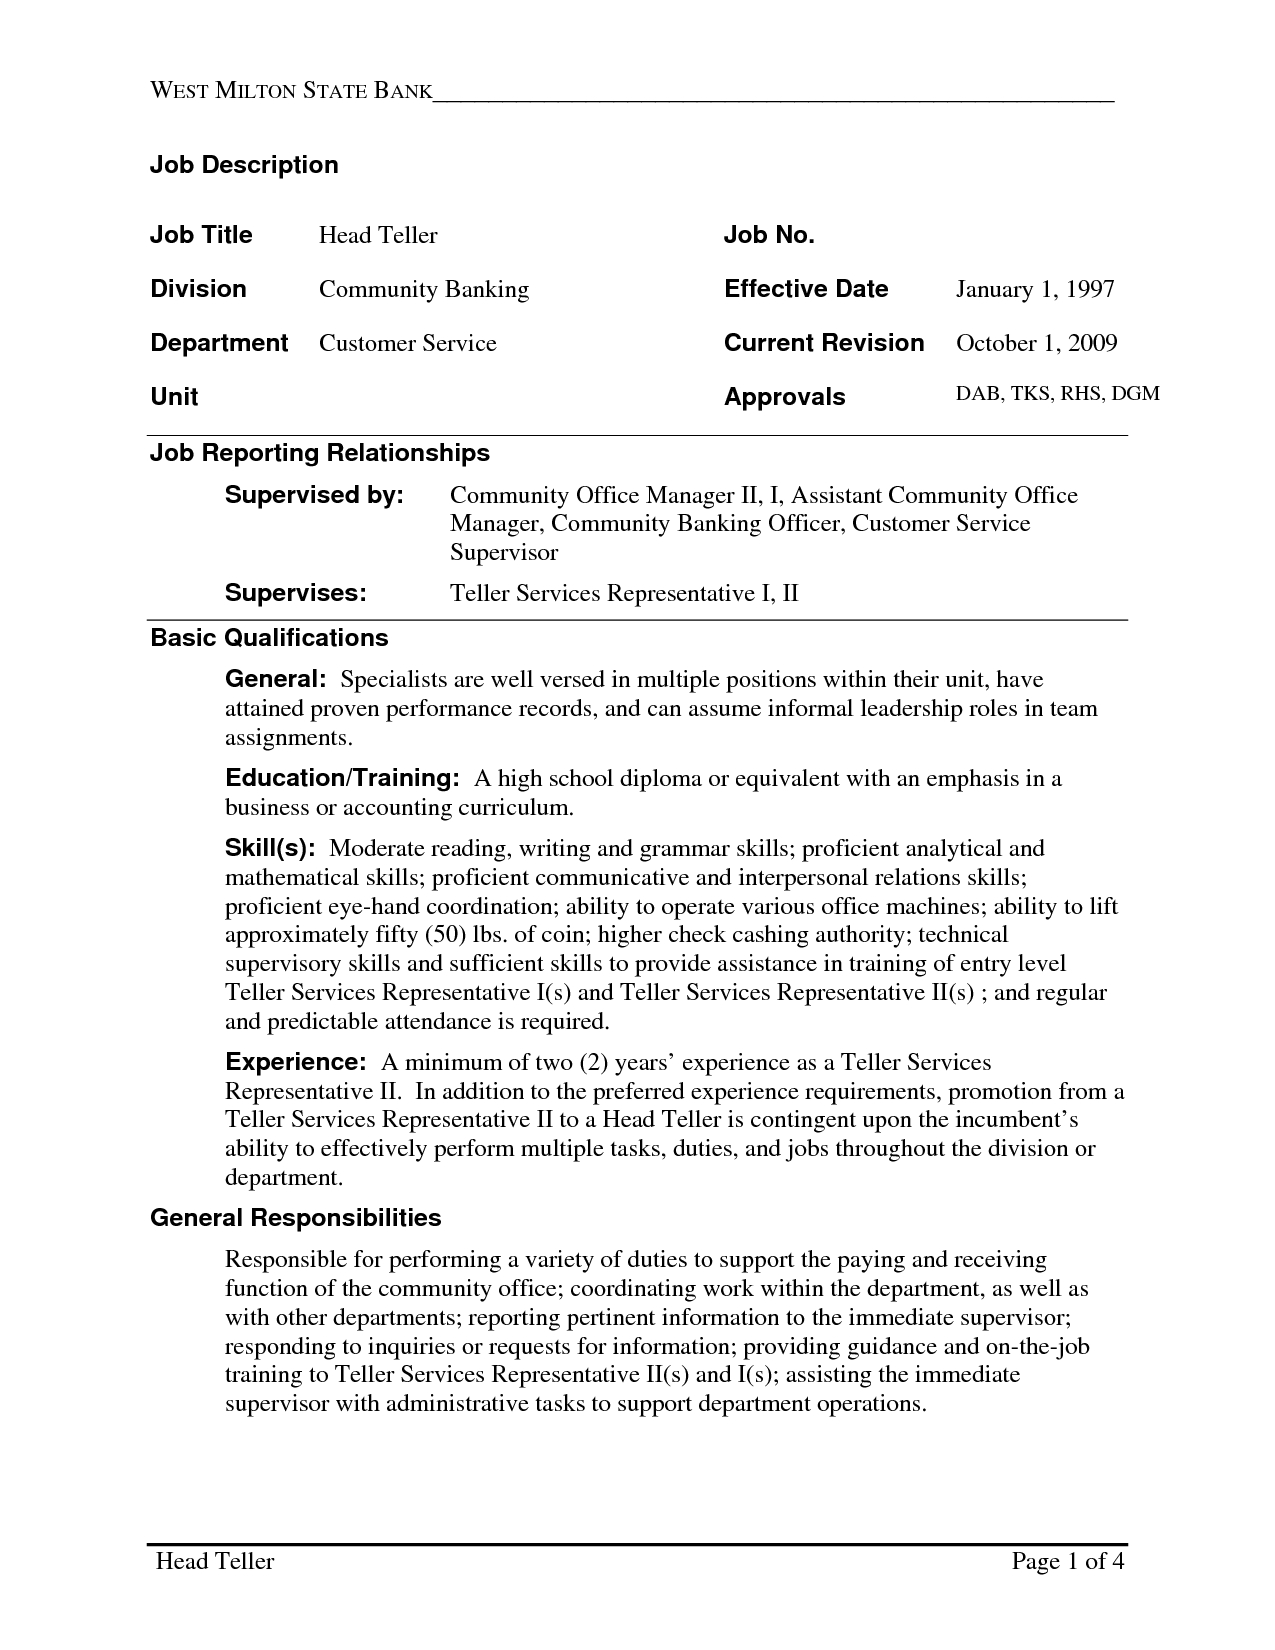 Resume Examples For A Bank Teller Position Sample Resume For Bank